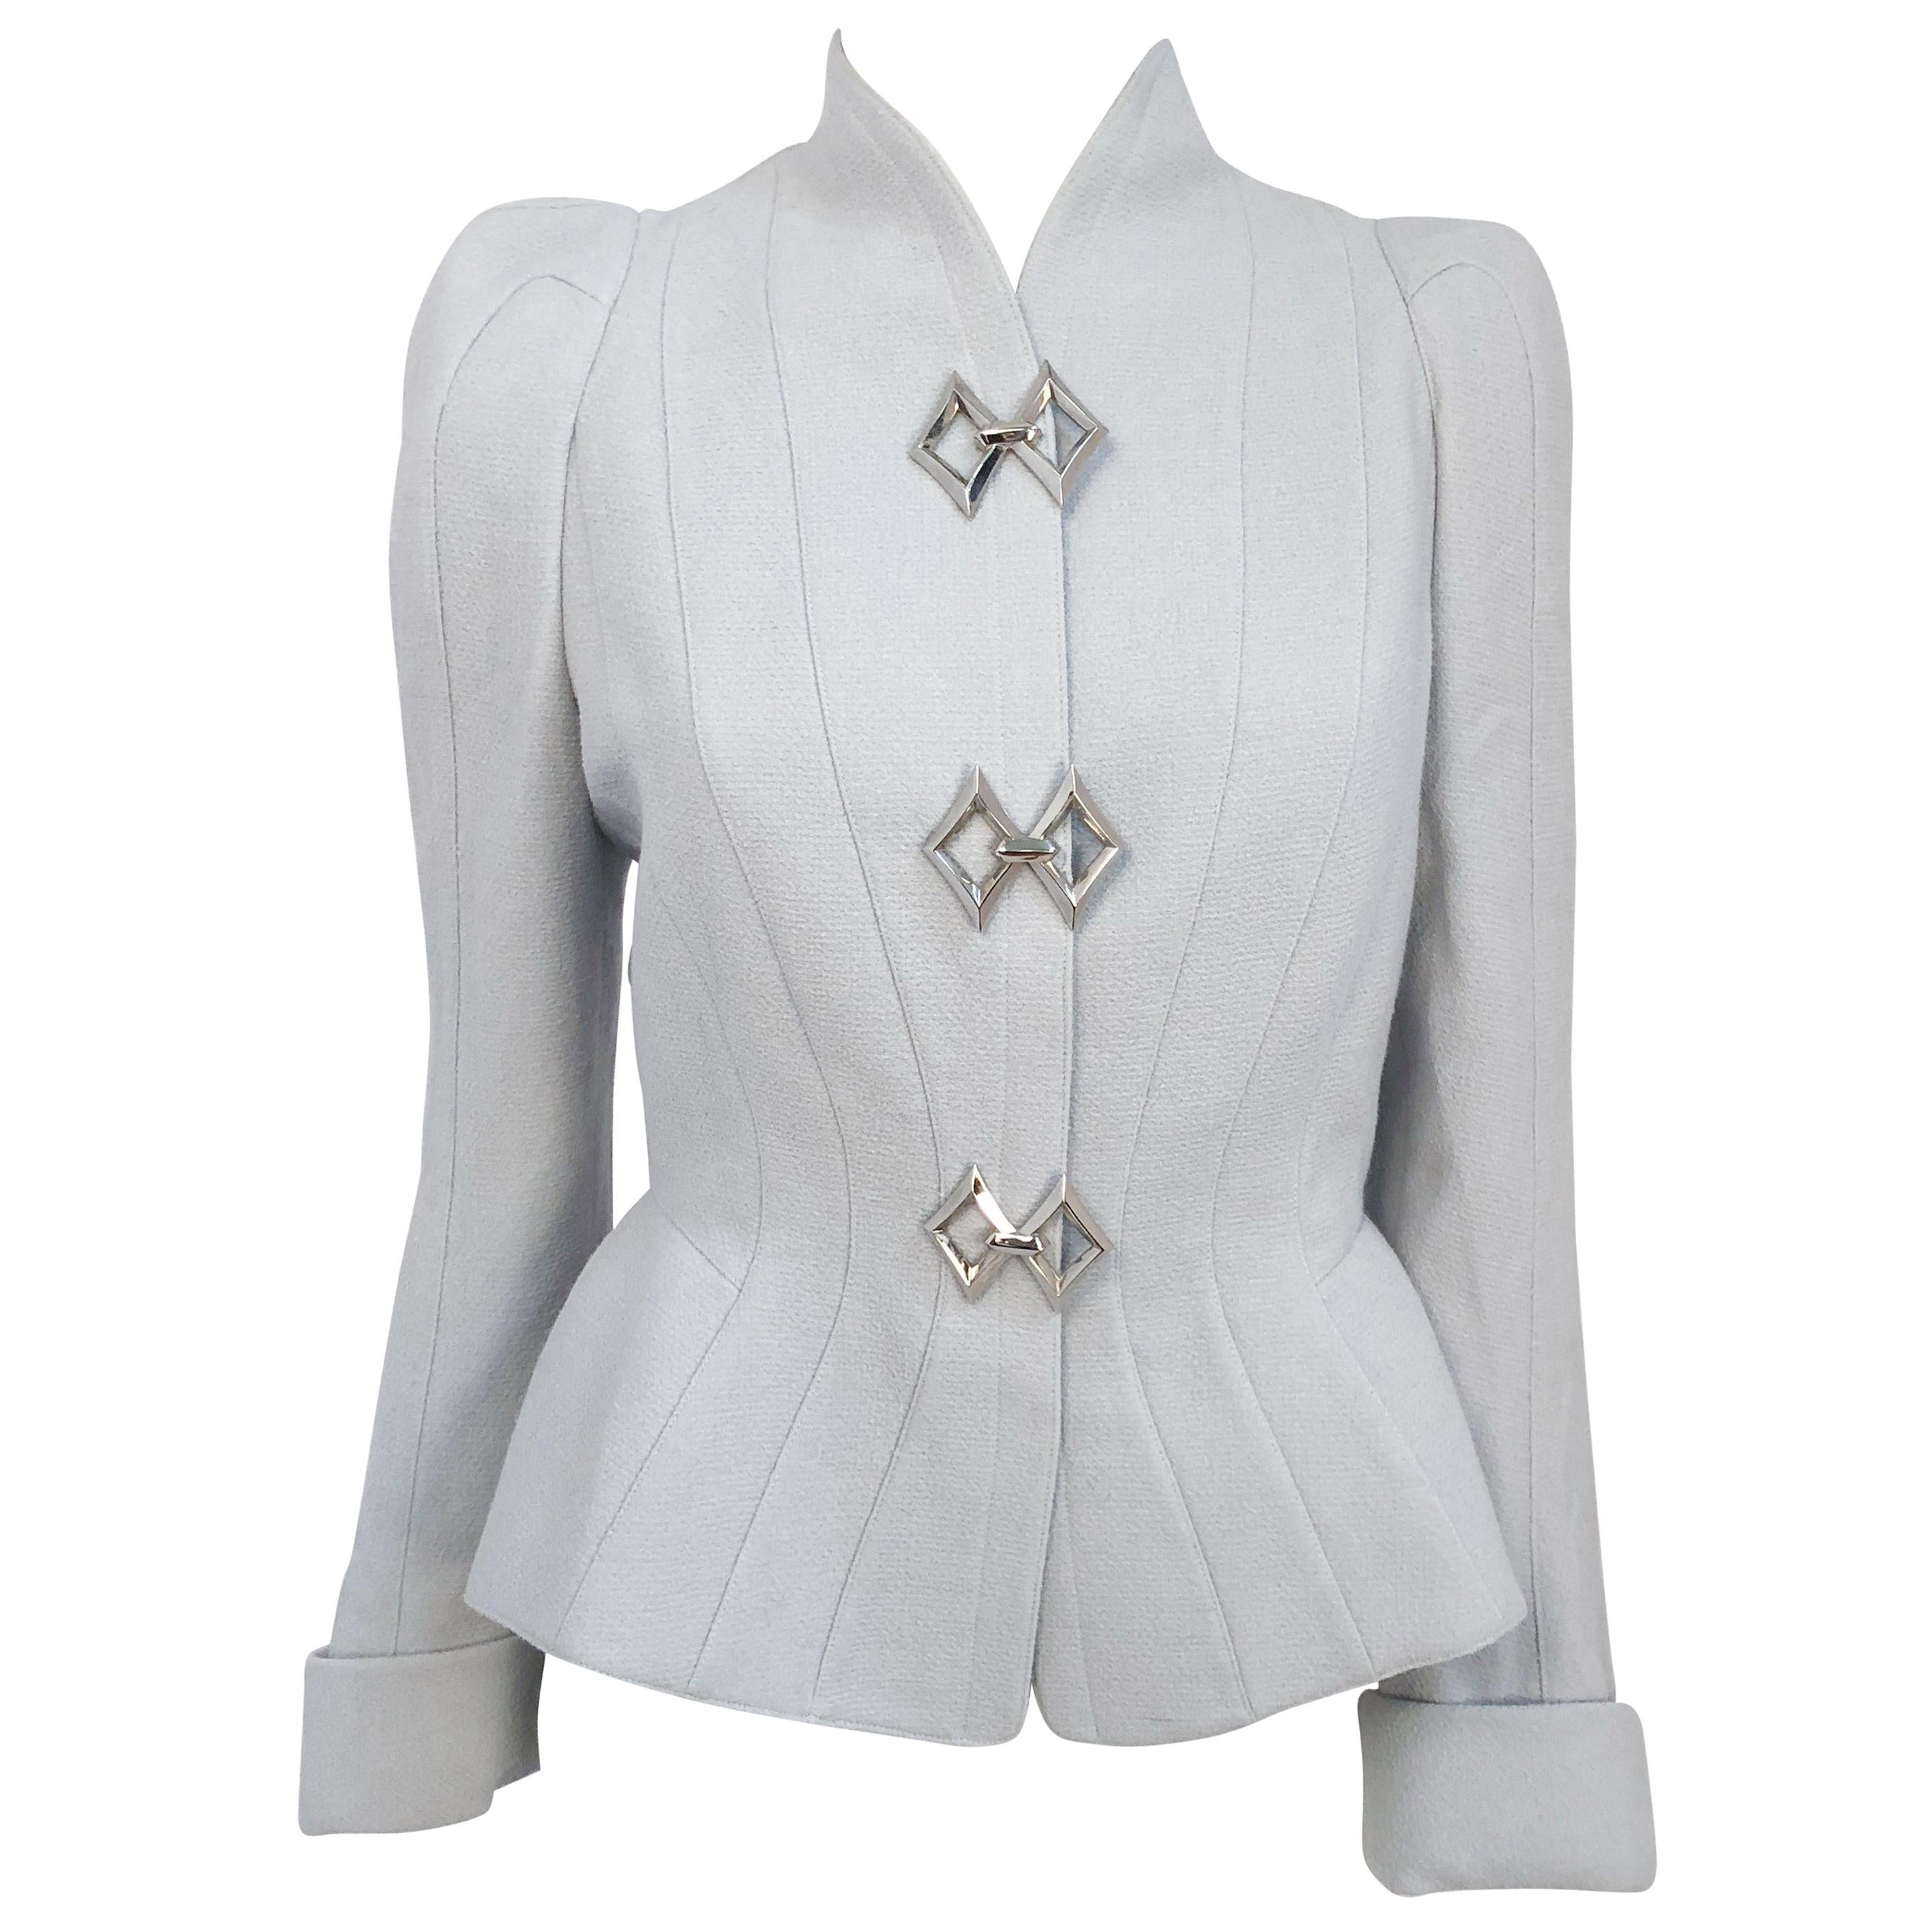 1980s Theirry Mugler Grey Paneled Jacket with Silver-toned Adornments